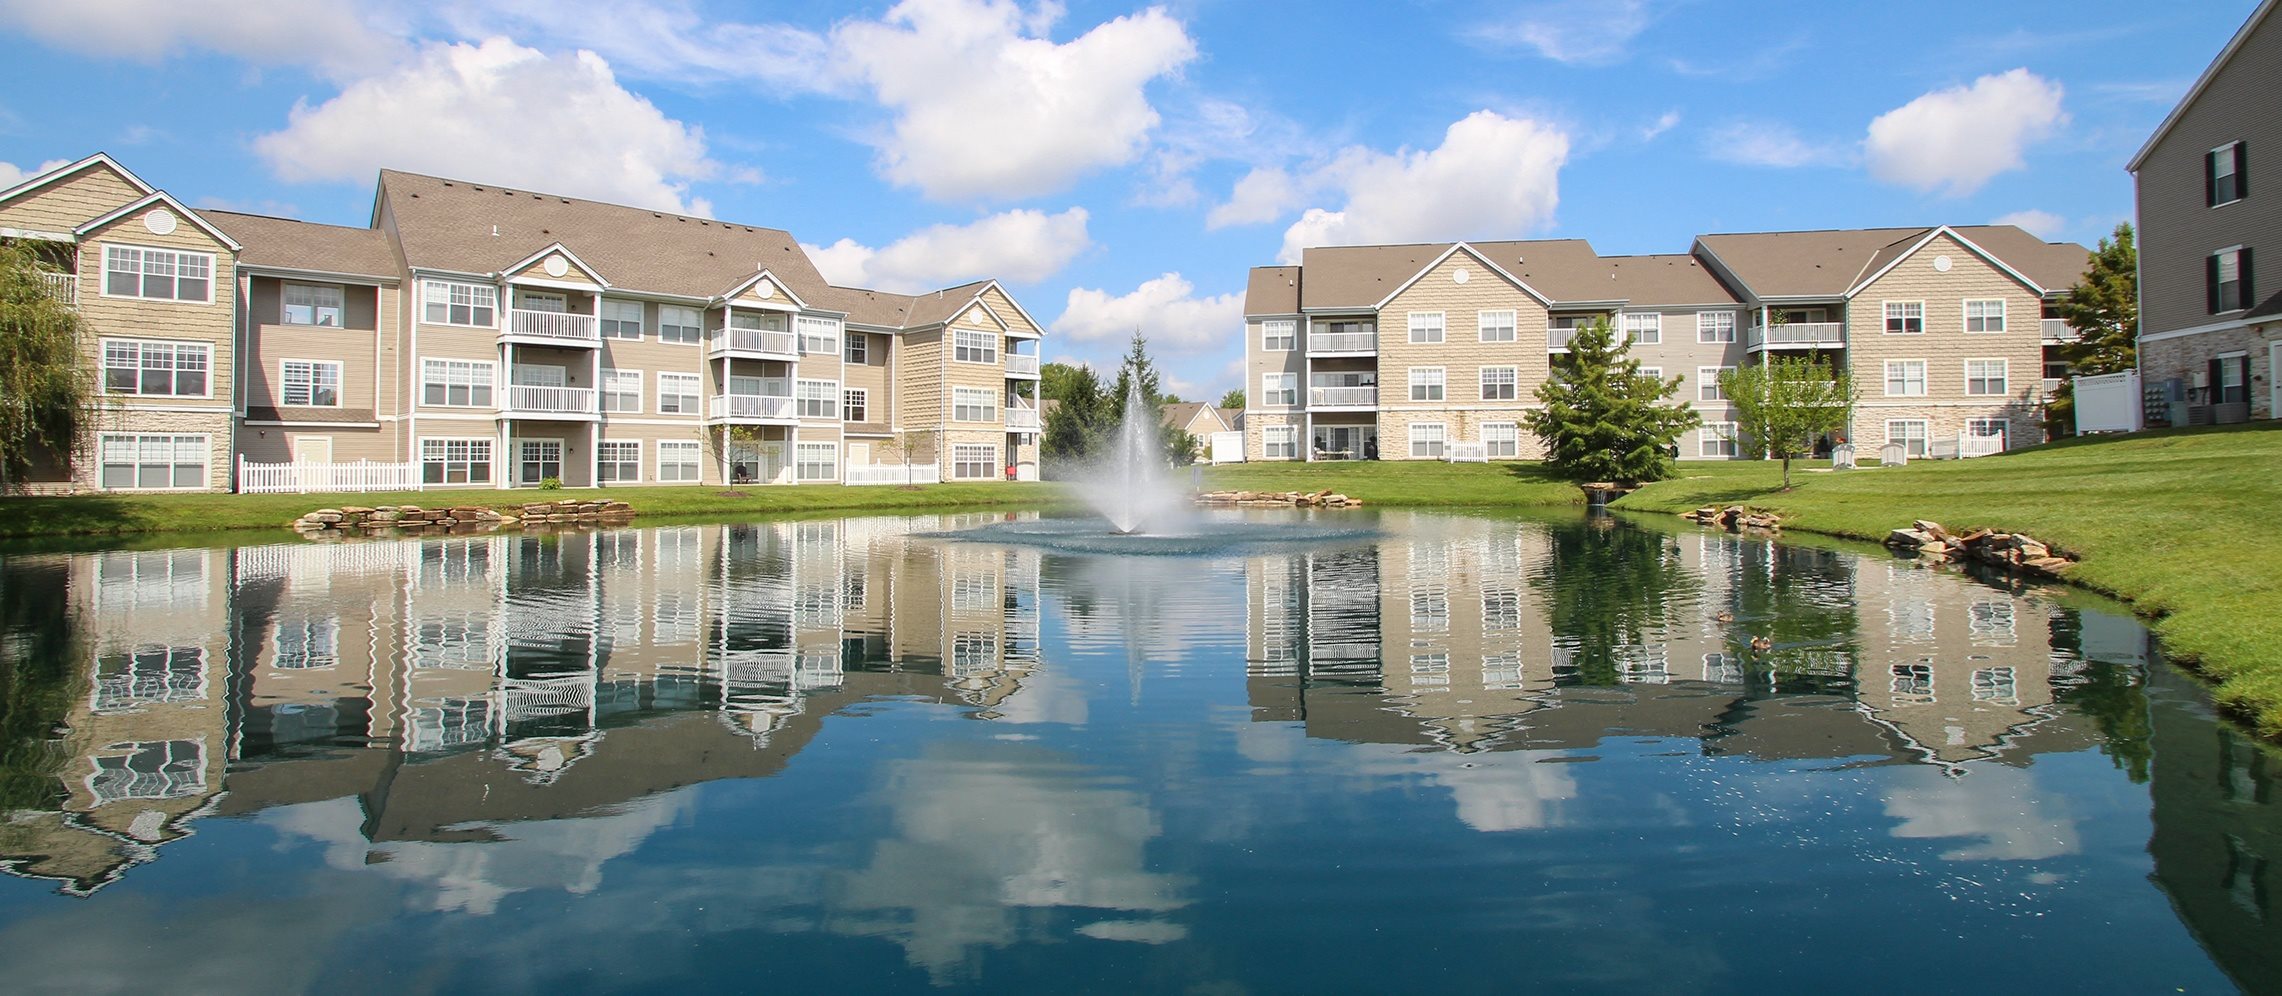 This is a picture of a fountain in a pond with building exteriors at Nantucket Apartments, in Loveland, OH.